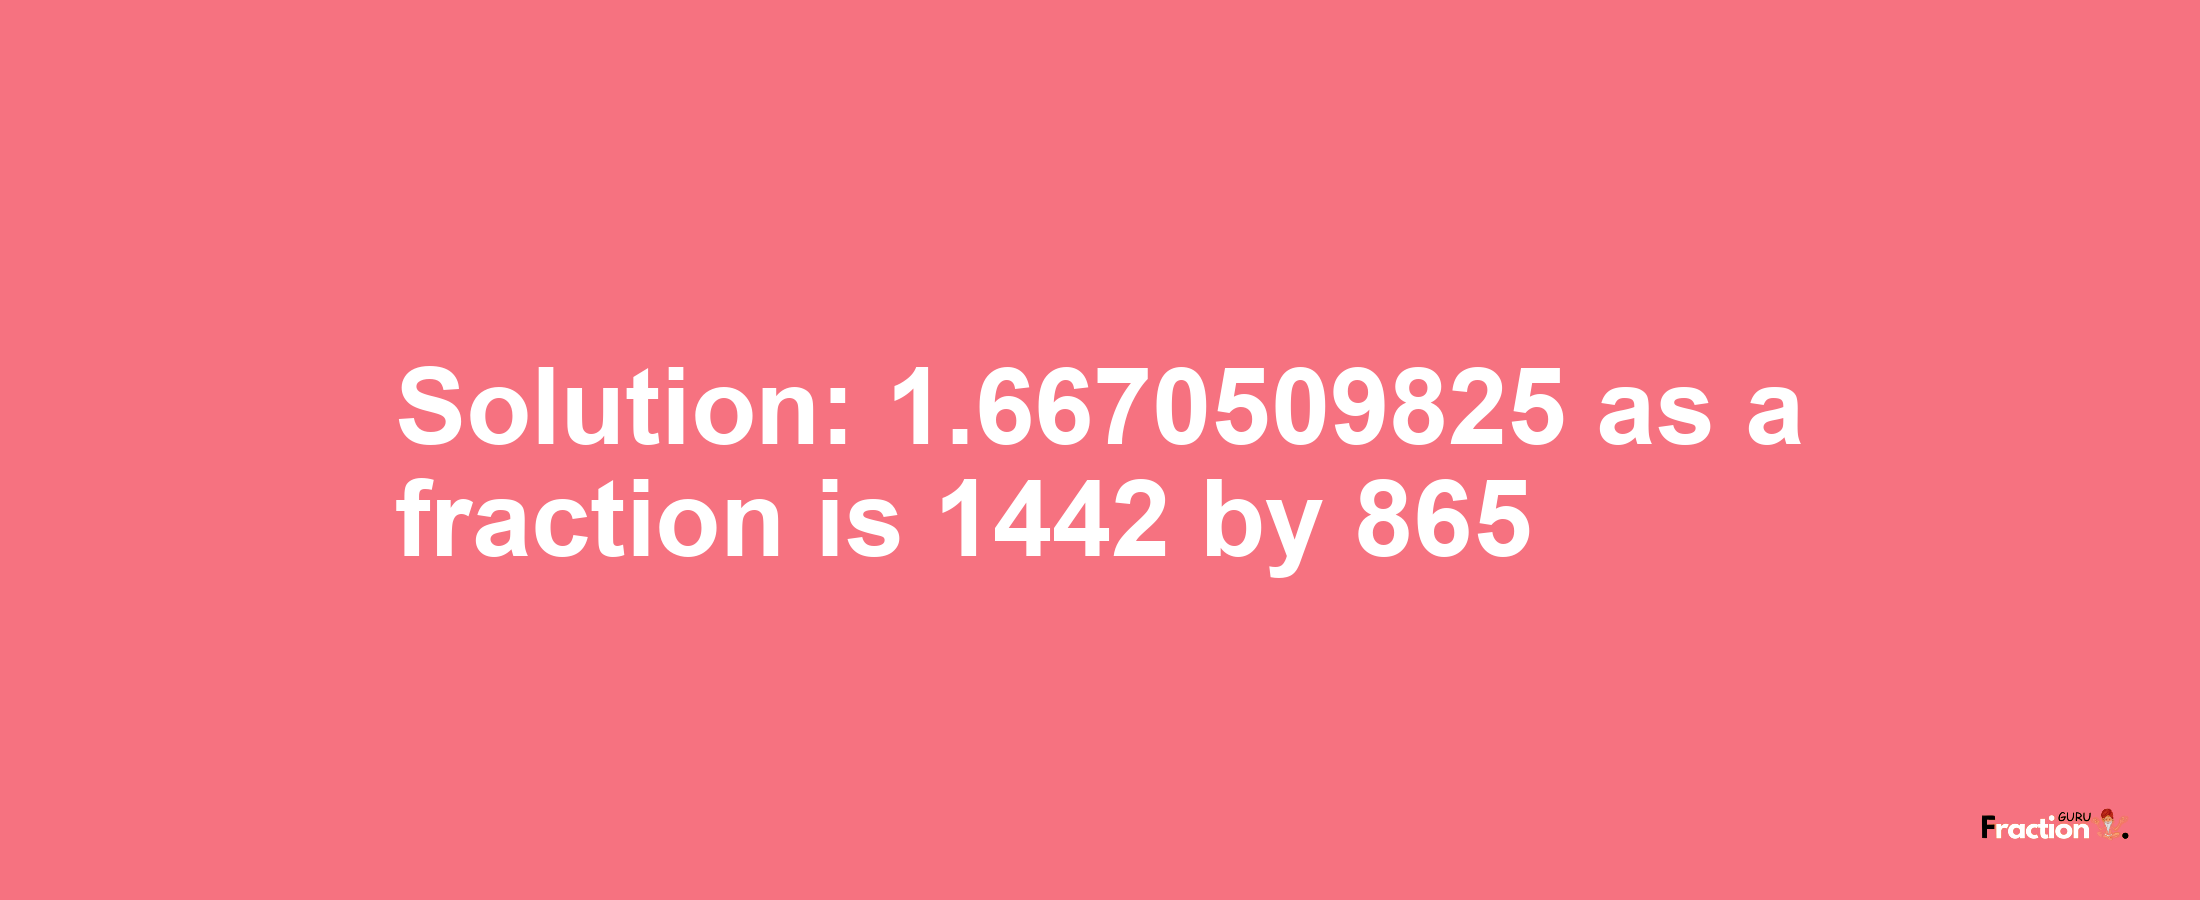 Solution:1.6670509825 as a fraction is 1442/865